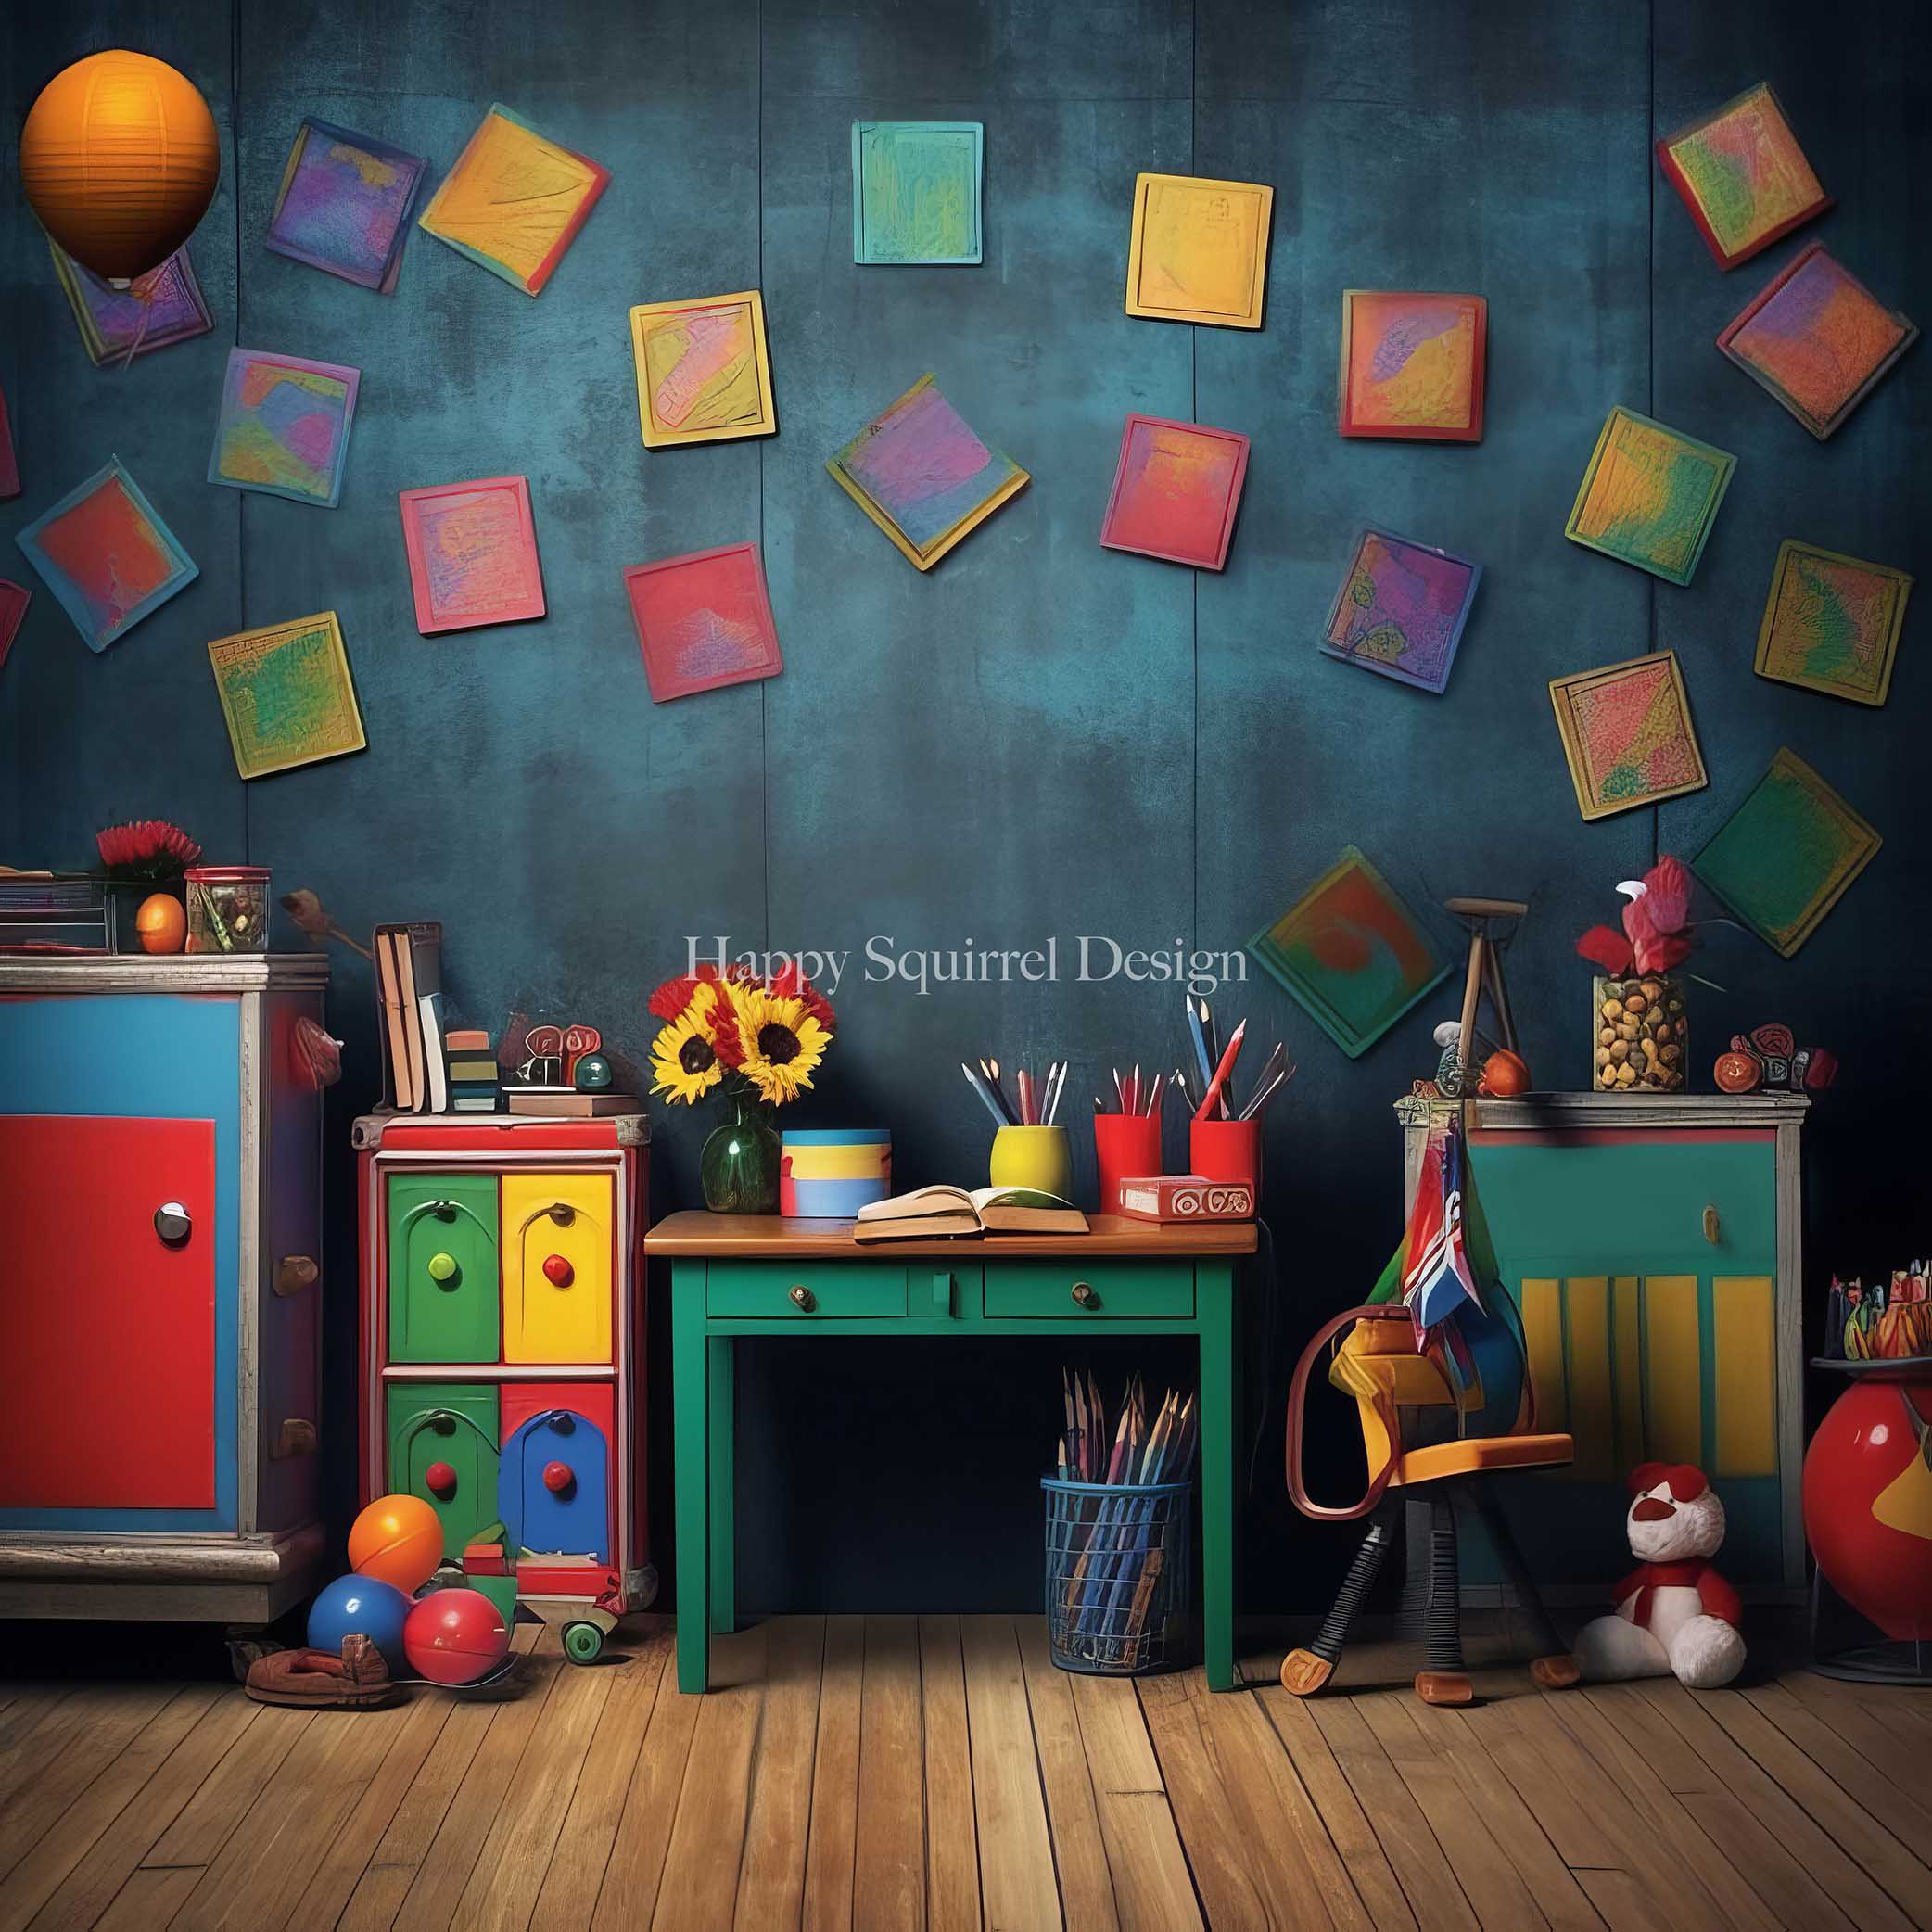 Kate Back to School Classroom Backdrop Designed by Happy Squirrel Design